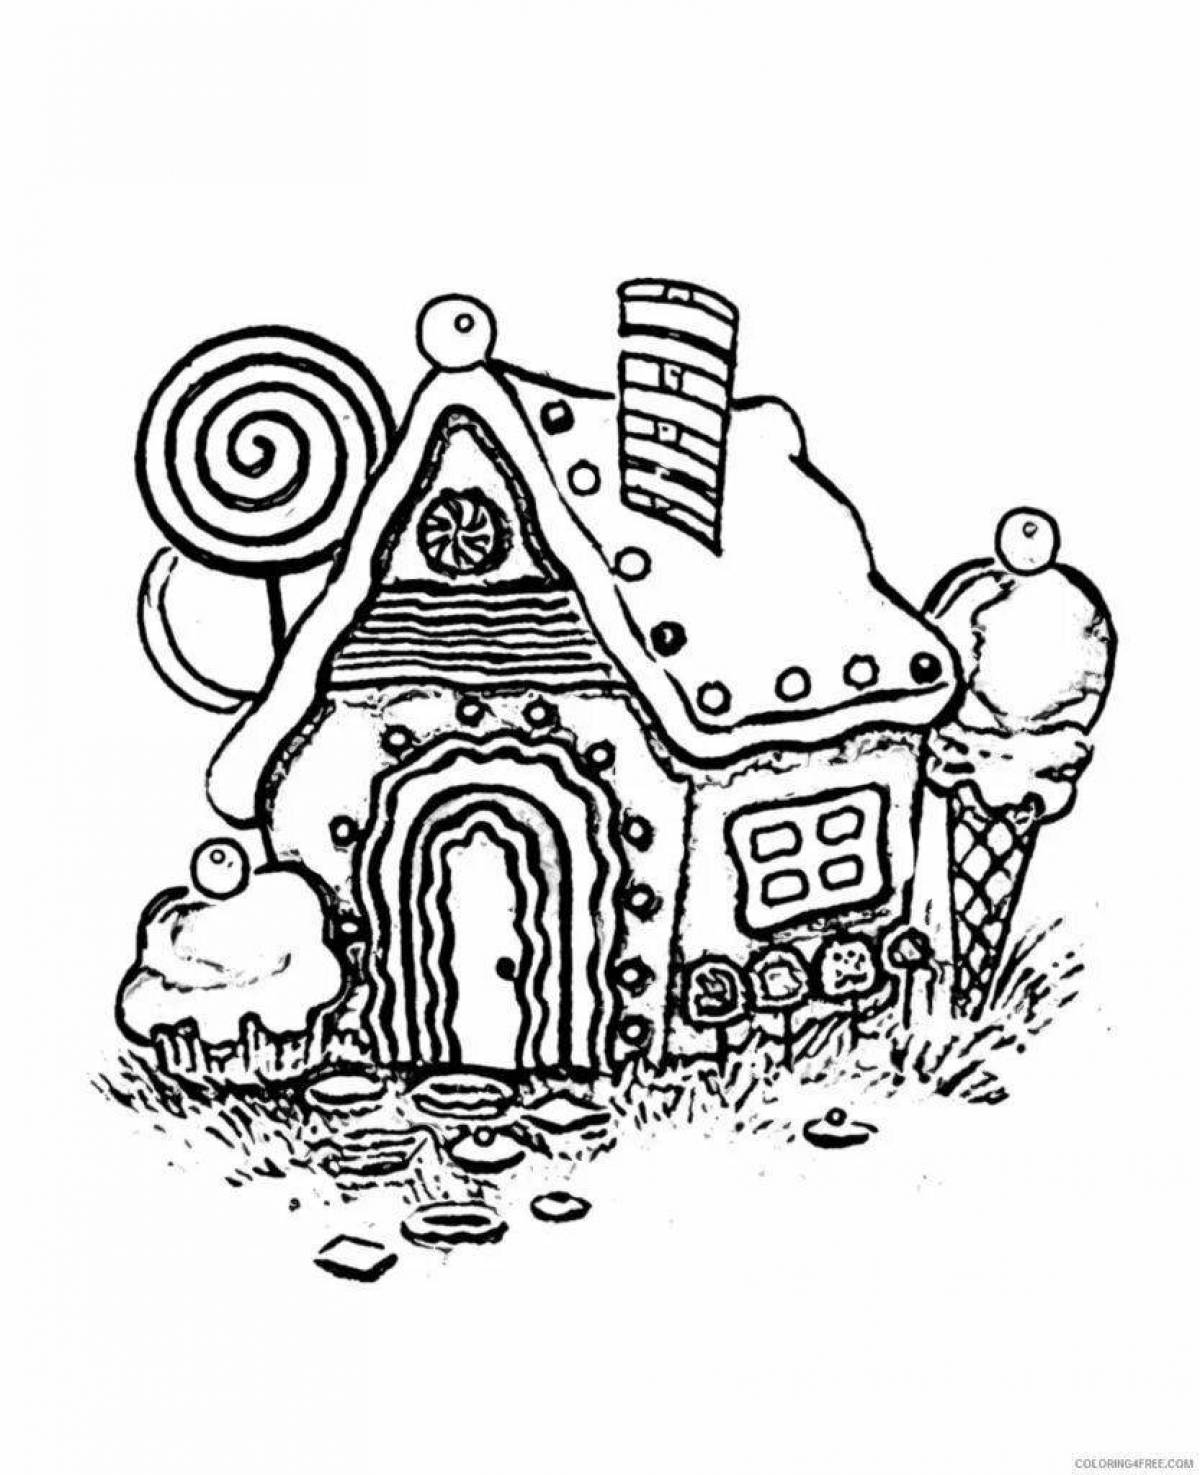 Cute fairytale gingerbread house coloring book